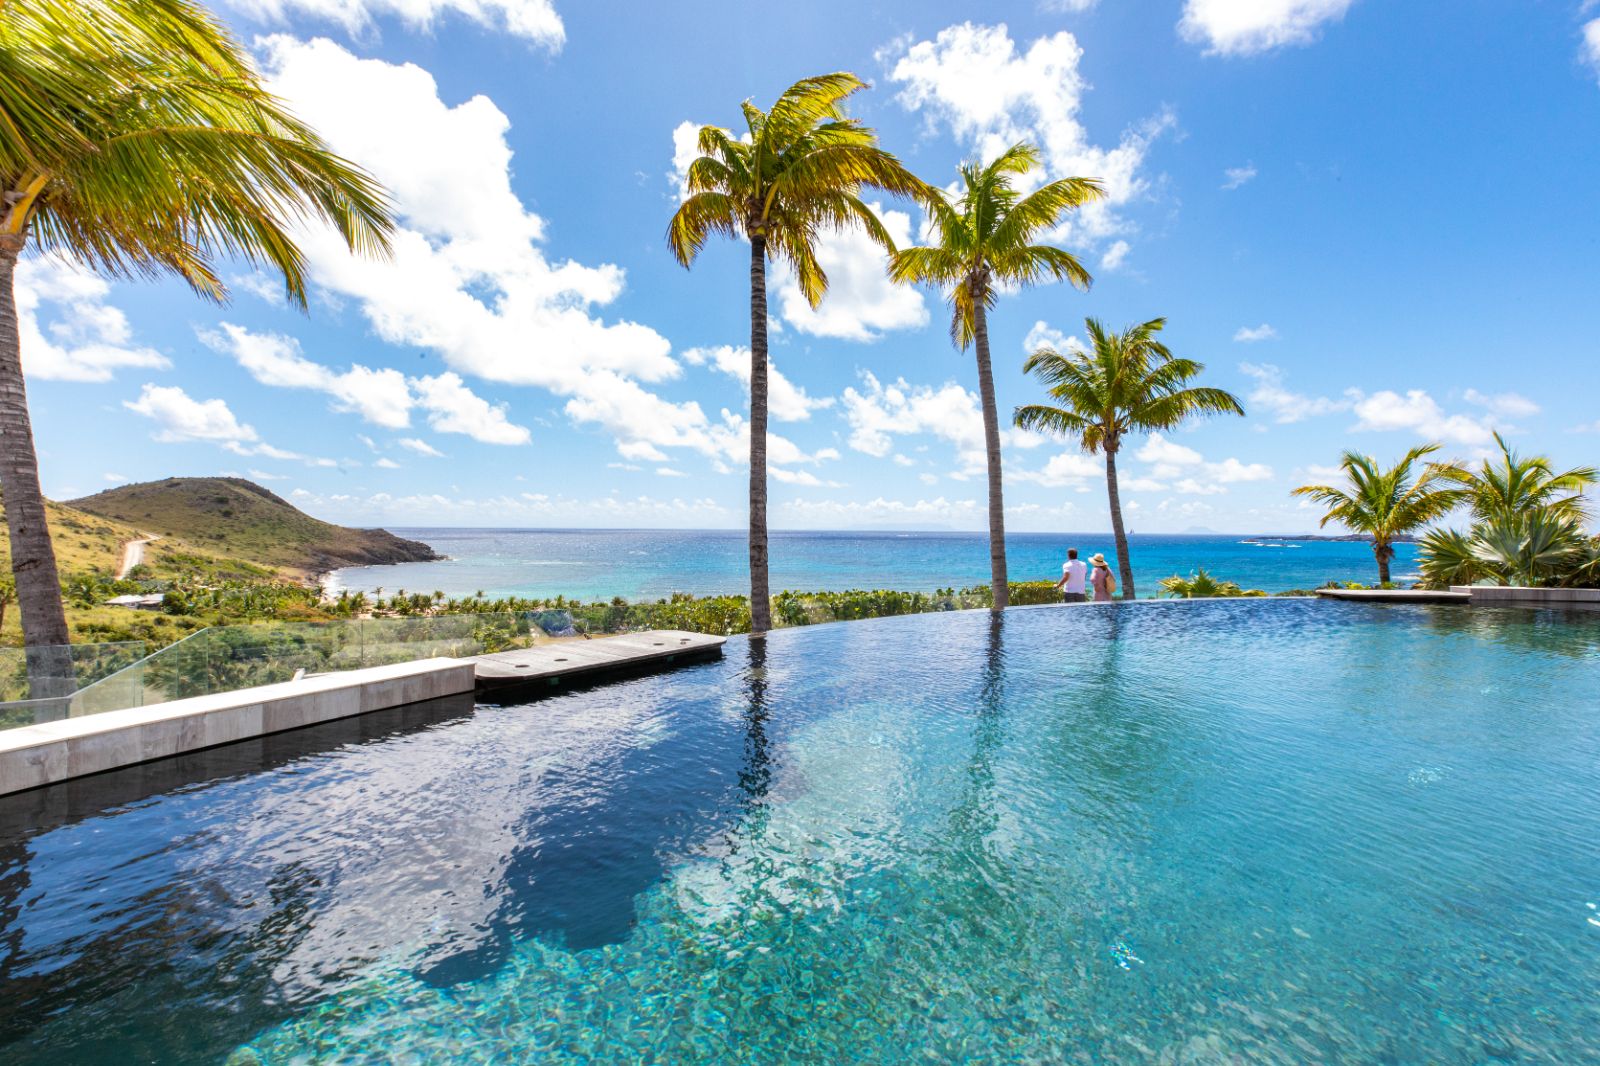 Infinity pool with ocean views at Hotel Le Toiny in St Barths